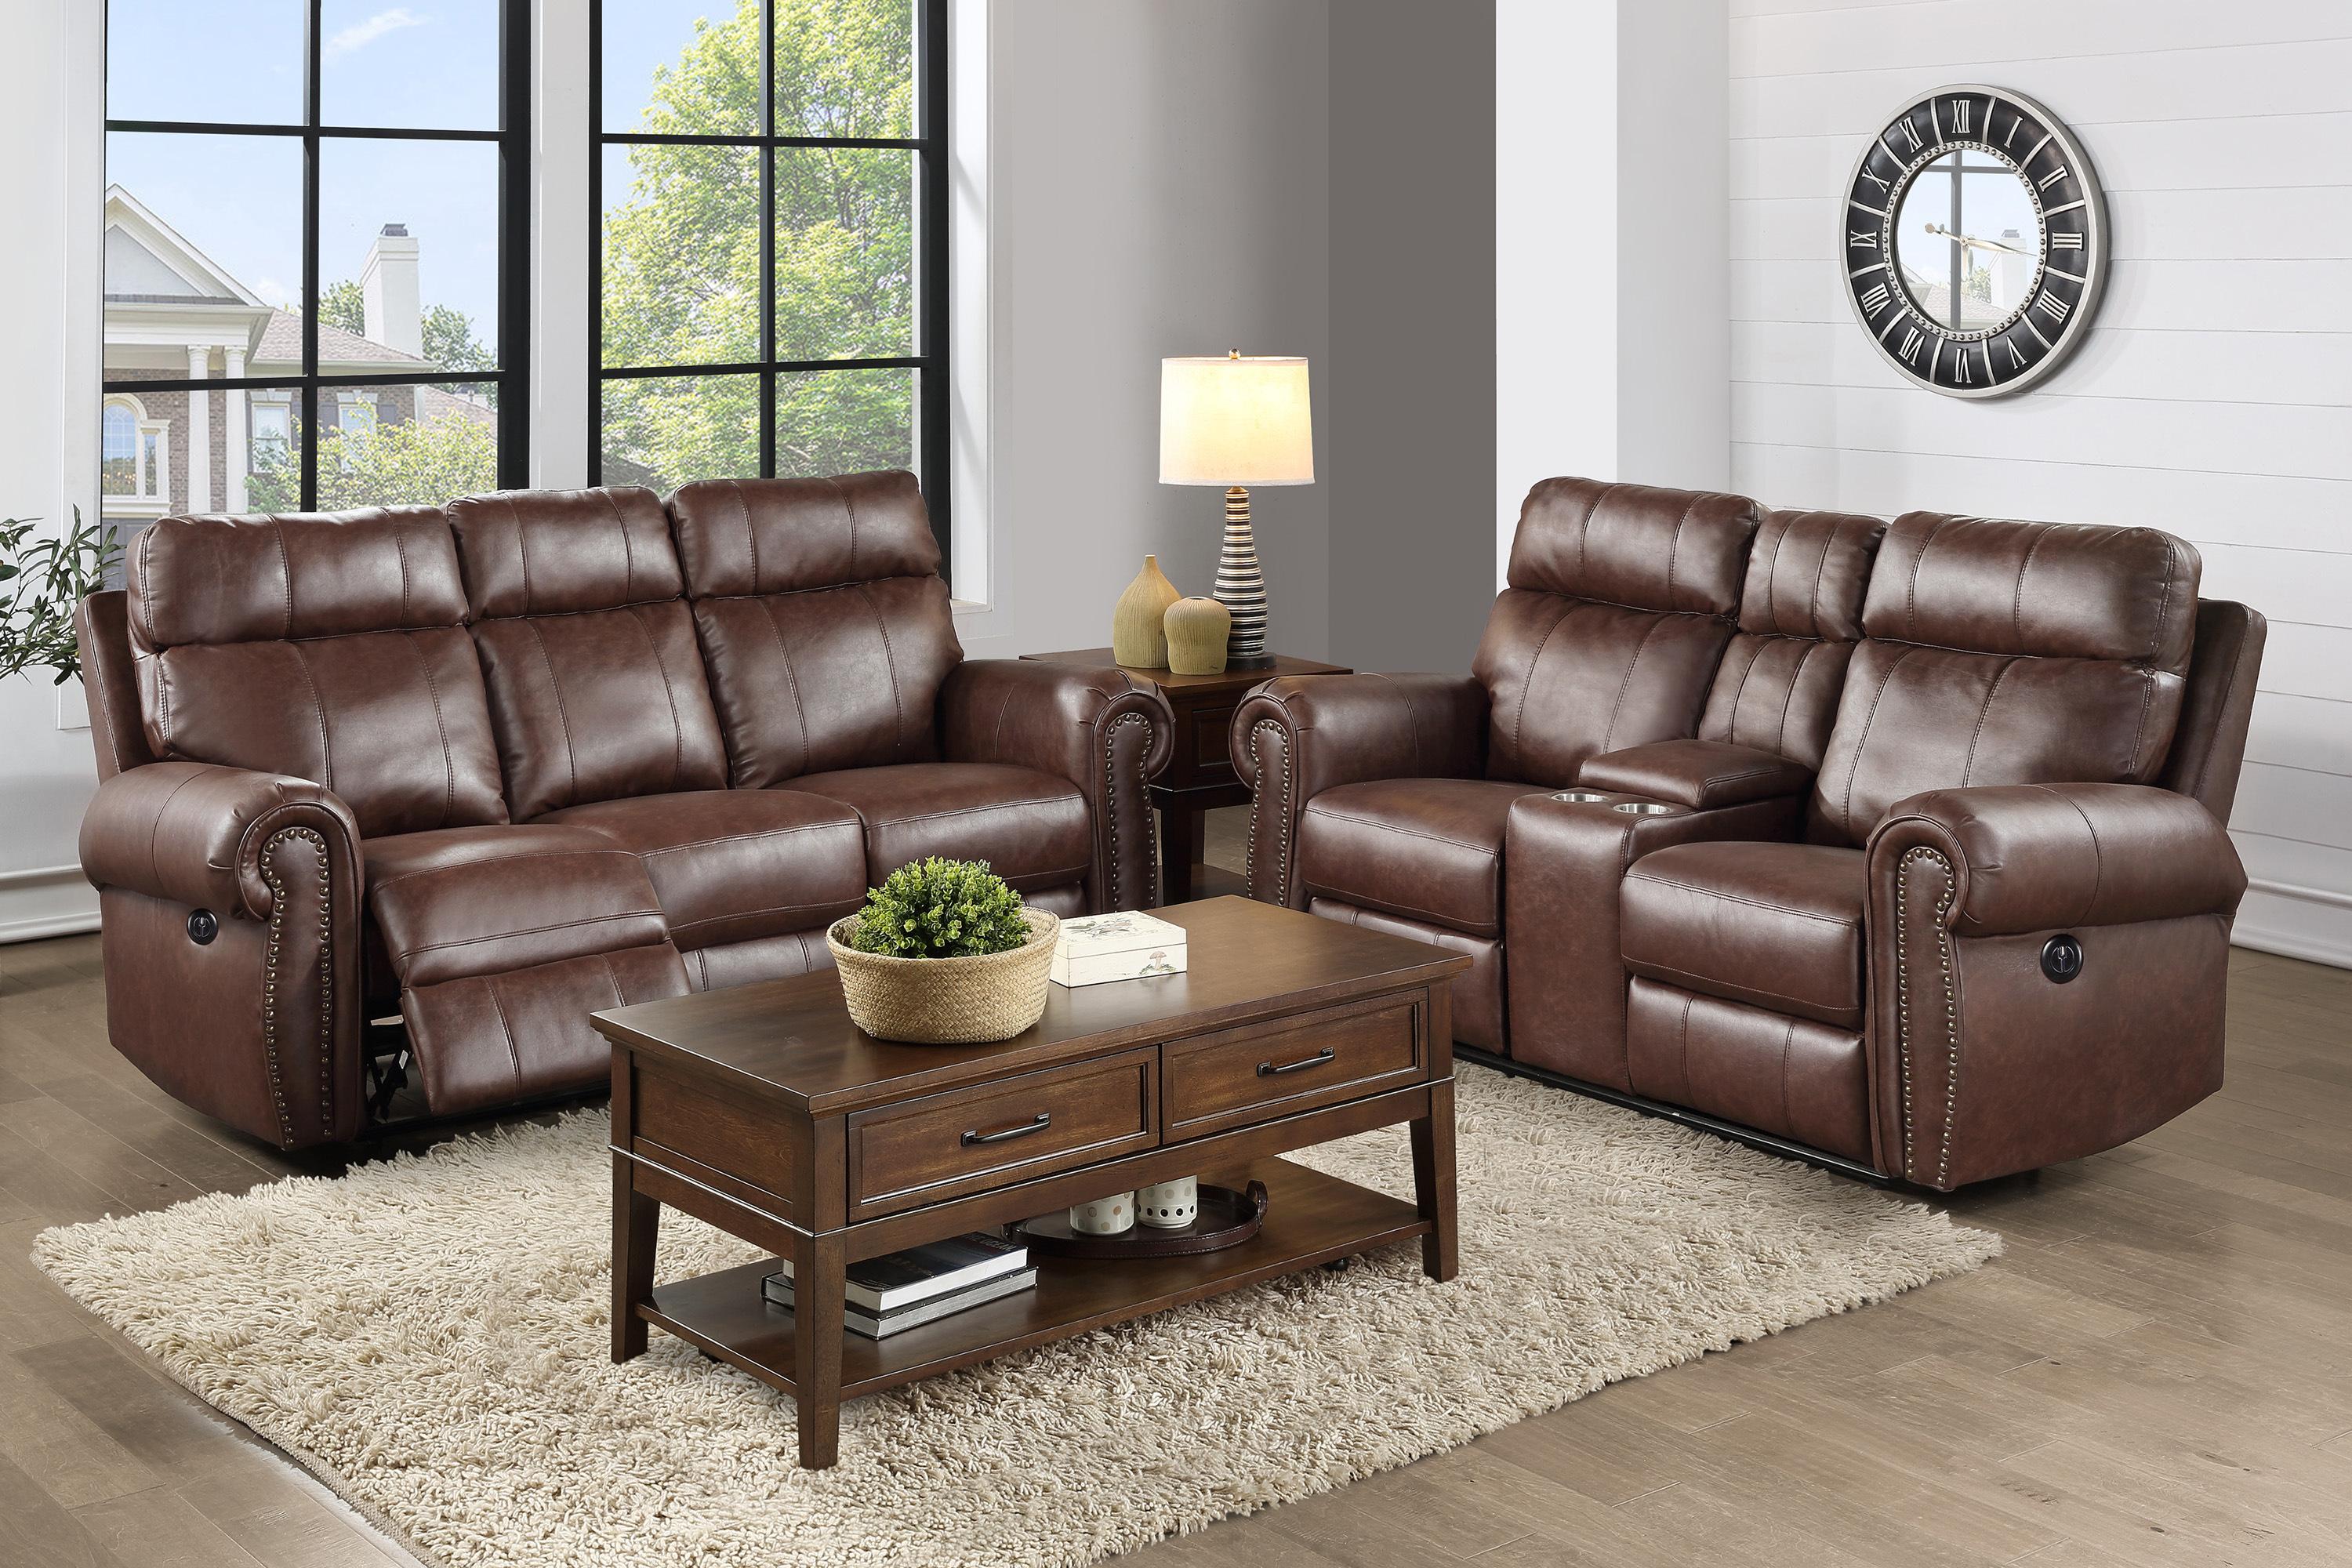 Transitional Power Reclining Set 9488BR-PW-2PC Granville 9488BR-PW-2PC in Brown Microfiber